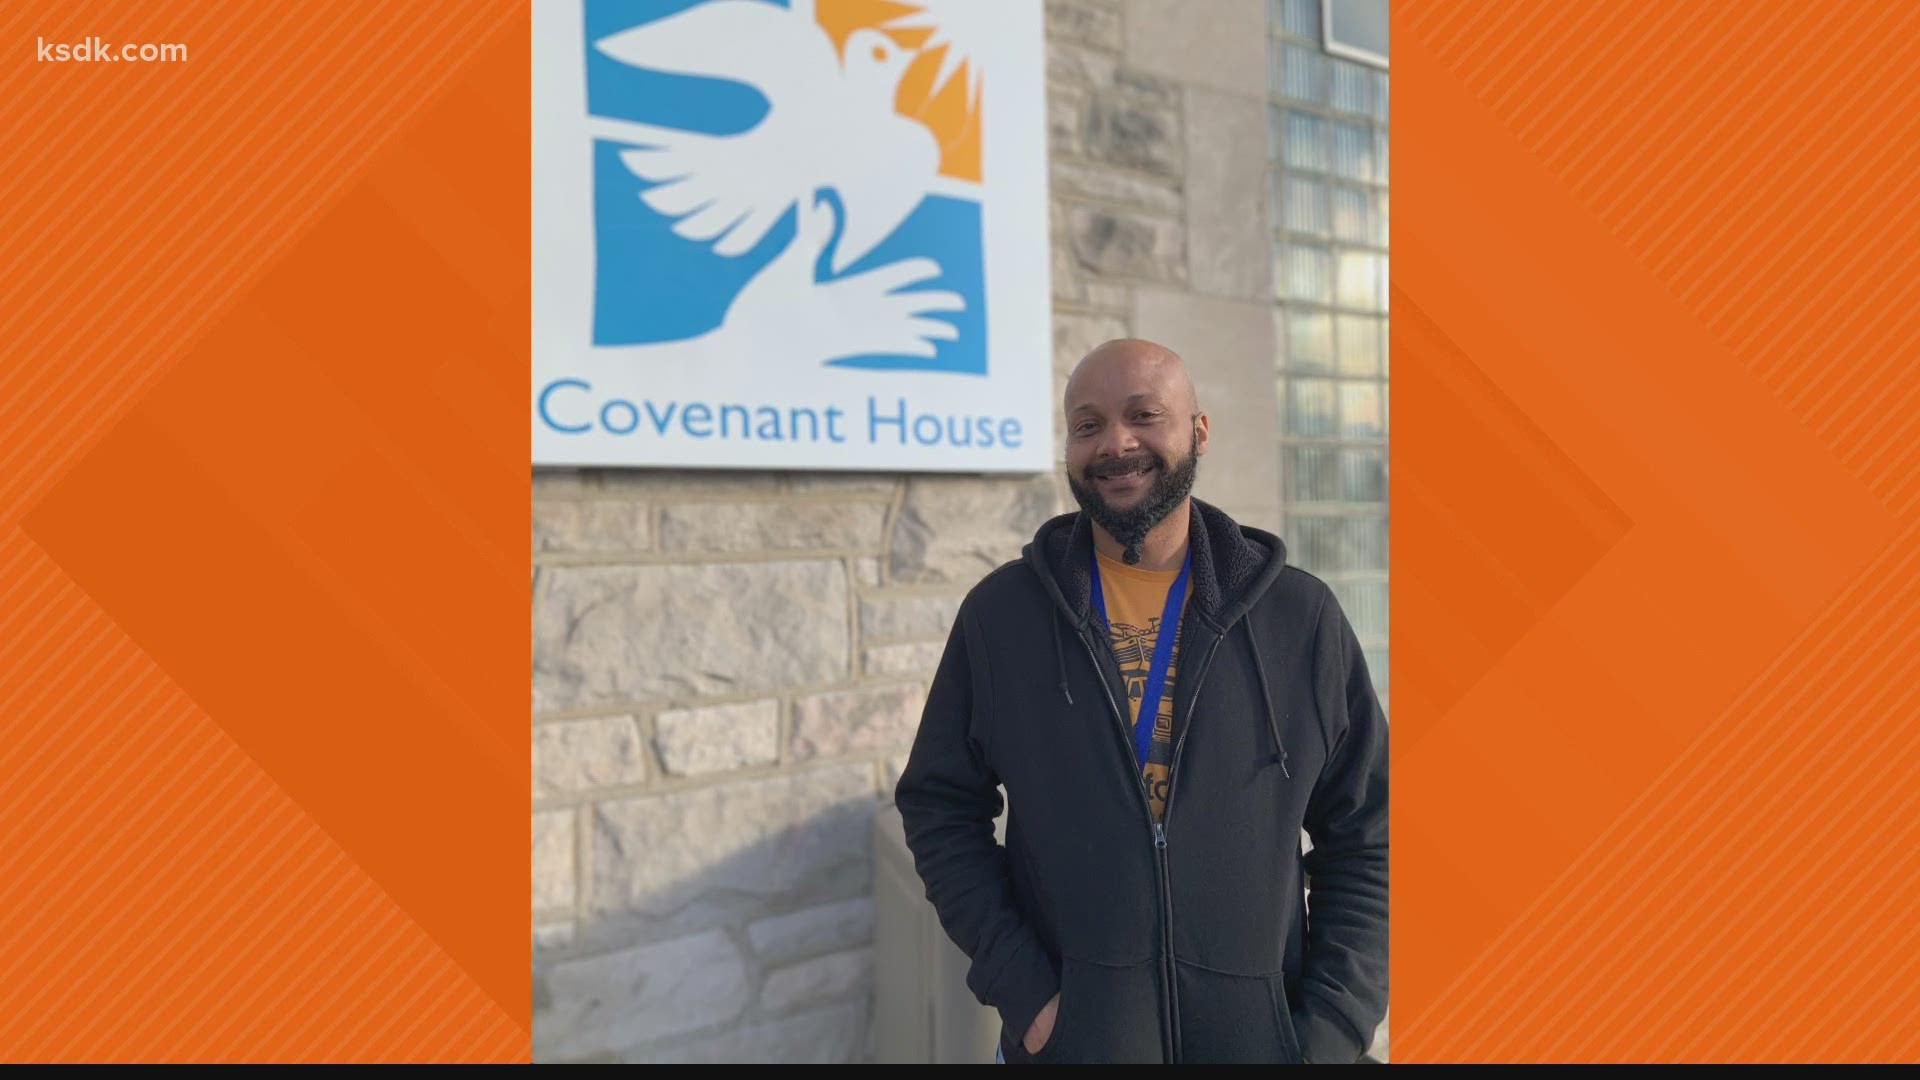 White is a case manager at a local youth shelter called Covenant House Missouri.